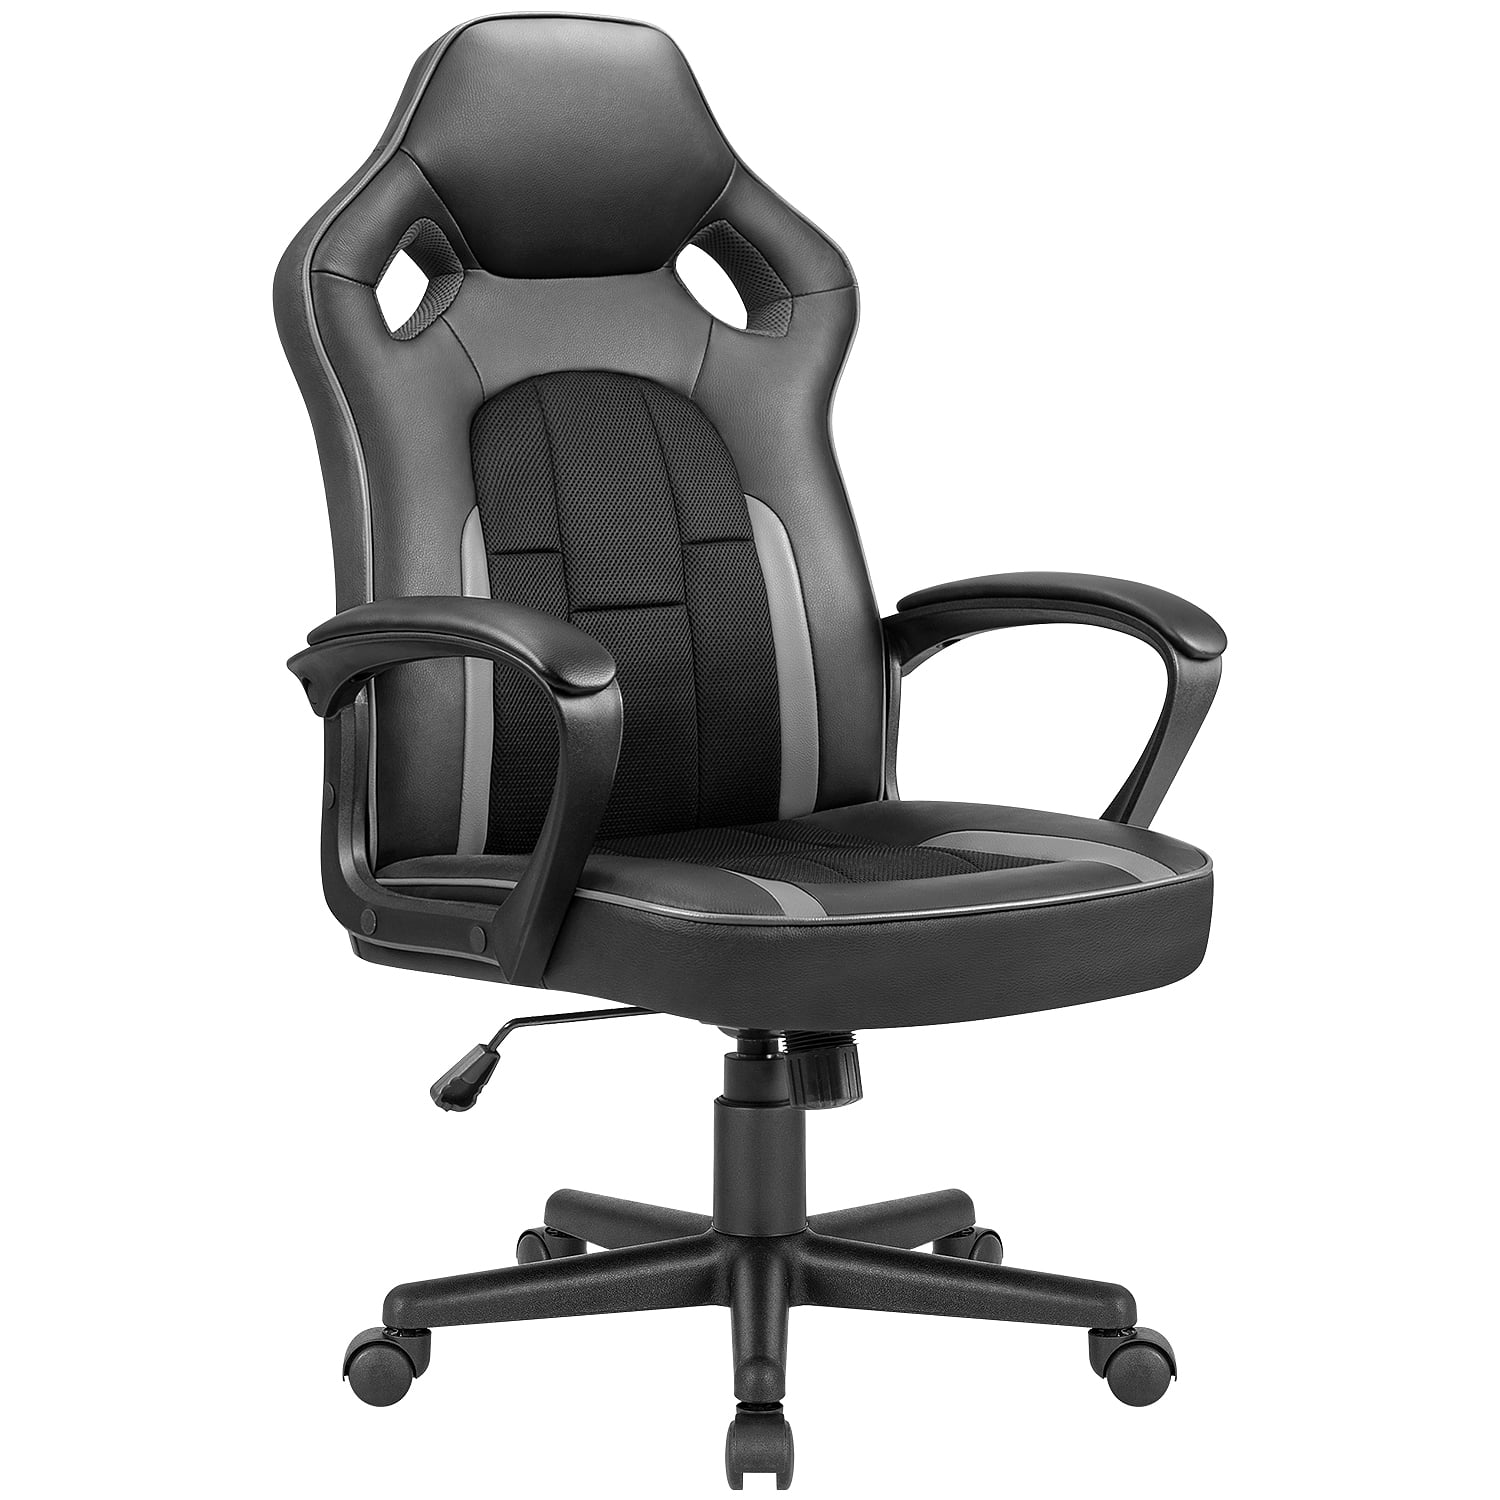 VINEEGO Gaming Chair High-Back PU Leather Office Chair Adjustable ...